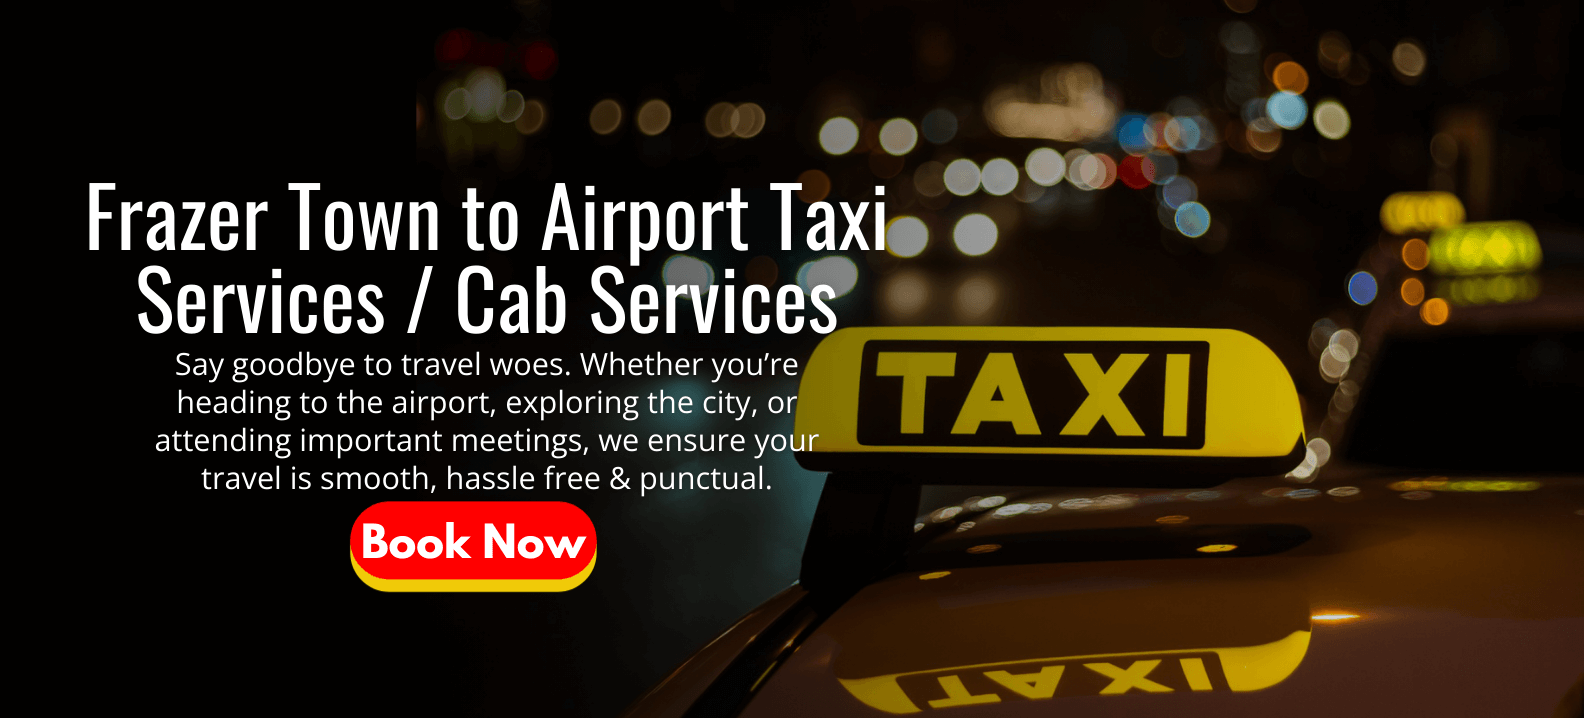 Frazer Town to Airport Taxi Services | Cab Services